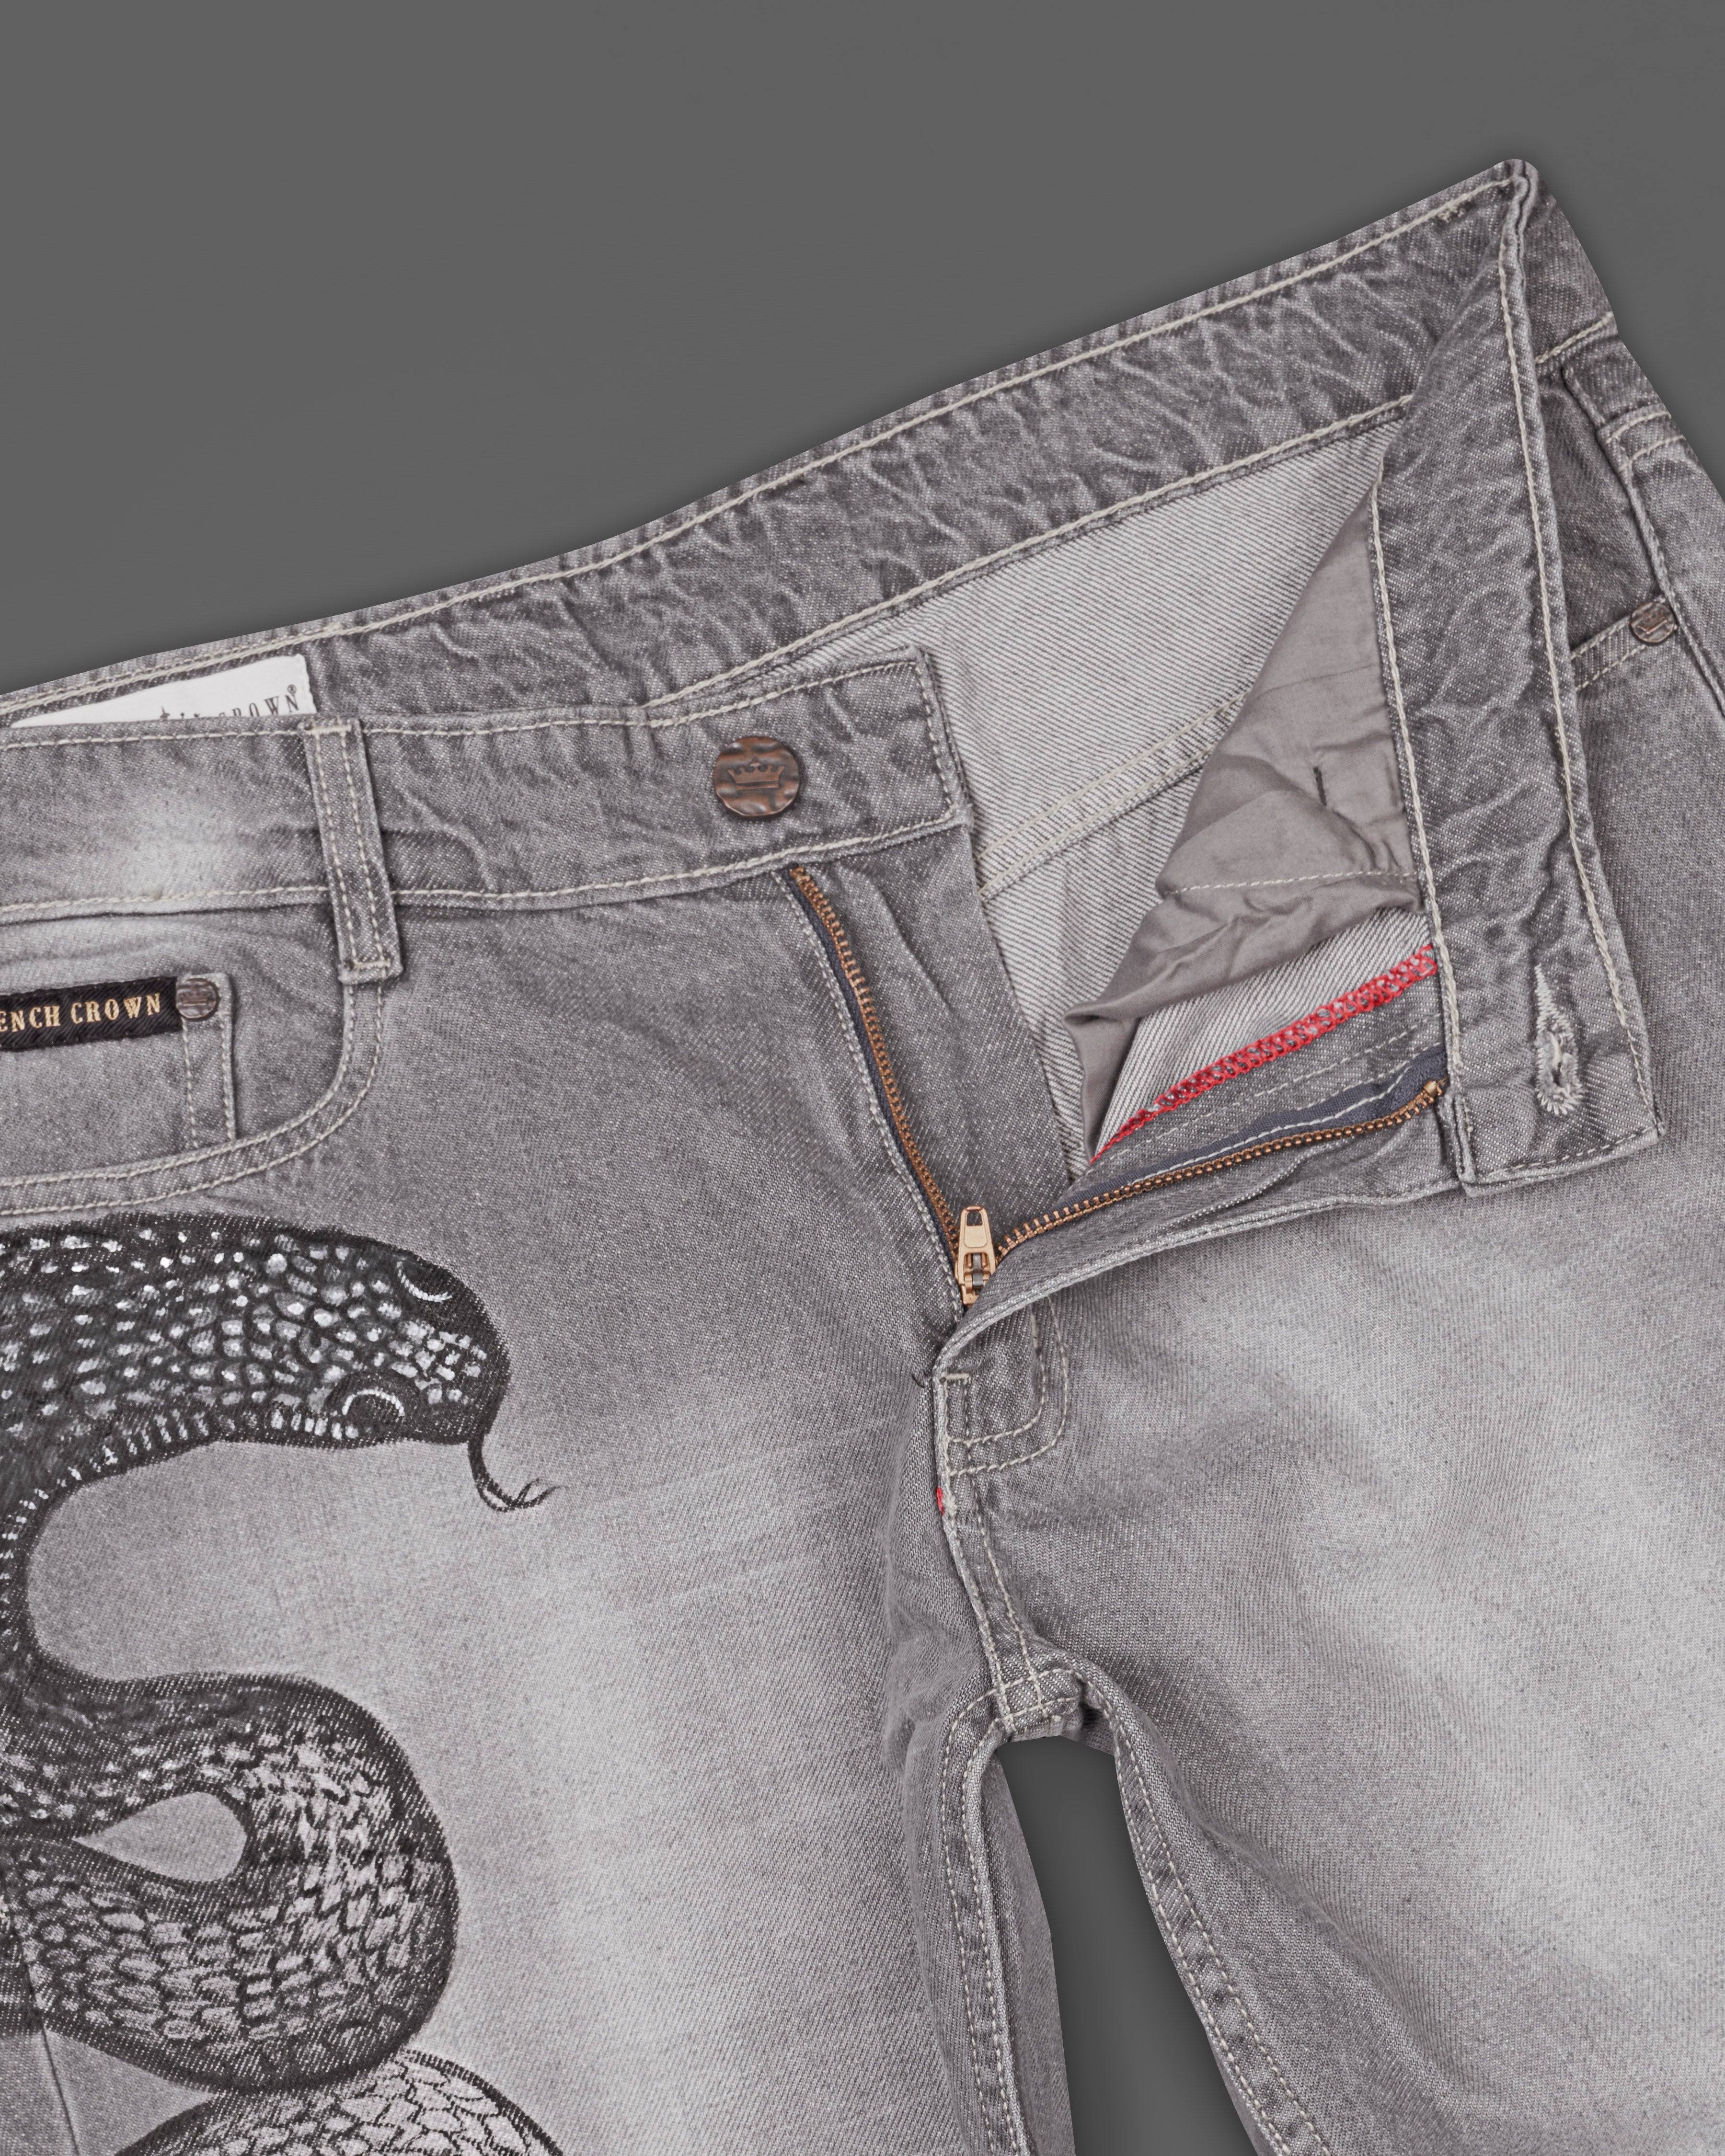 Monsoon Gray Snake Hand-Painted Stone Washed Denim J078-ART-32, J078-ART-34, J078-ART-36, J078-ART-38, J078-ART-40